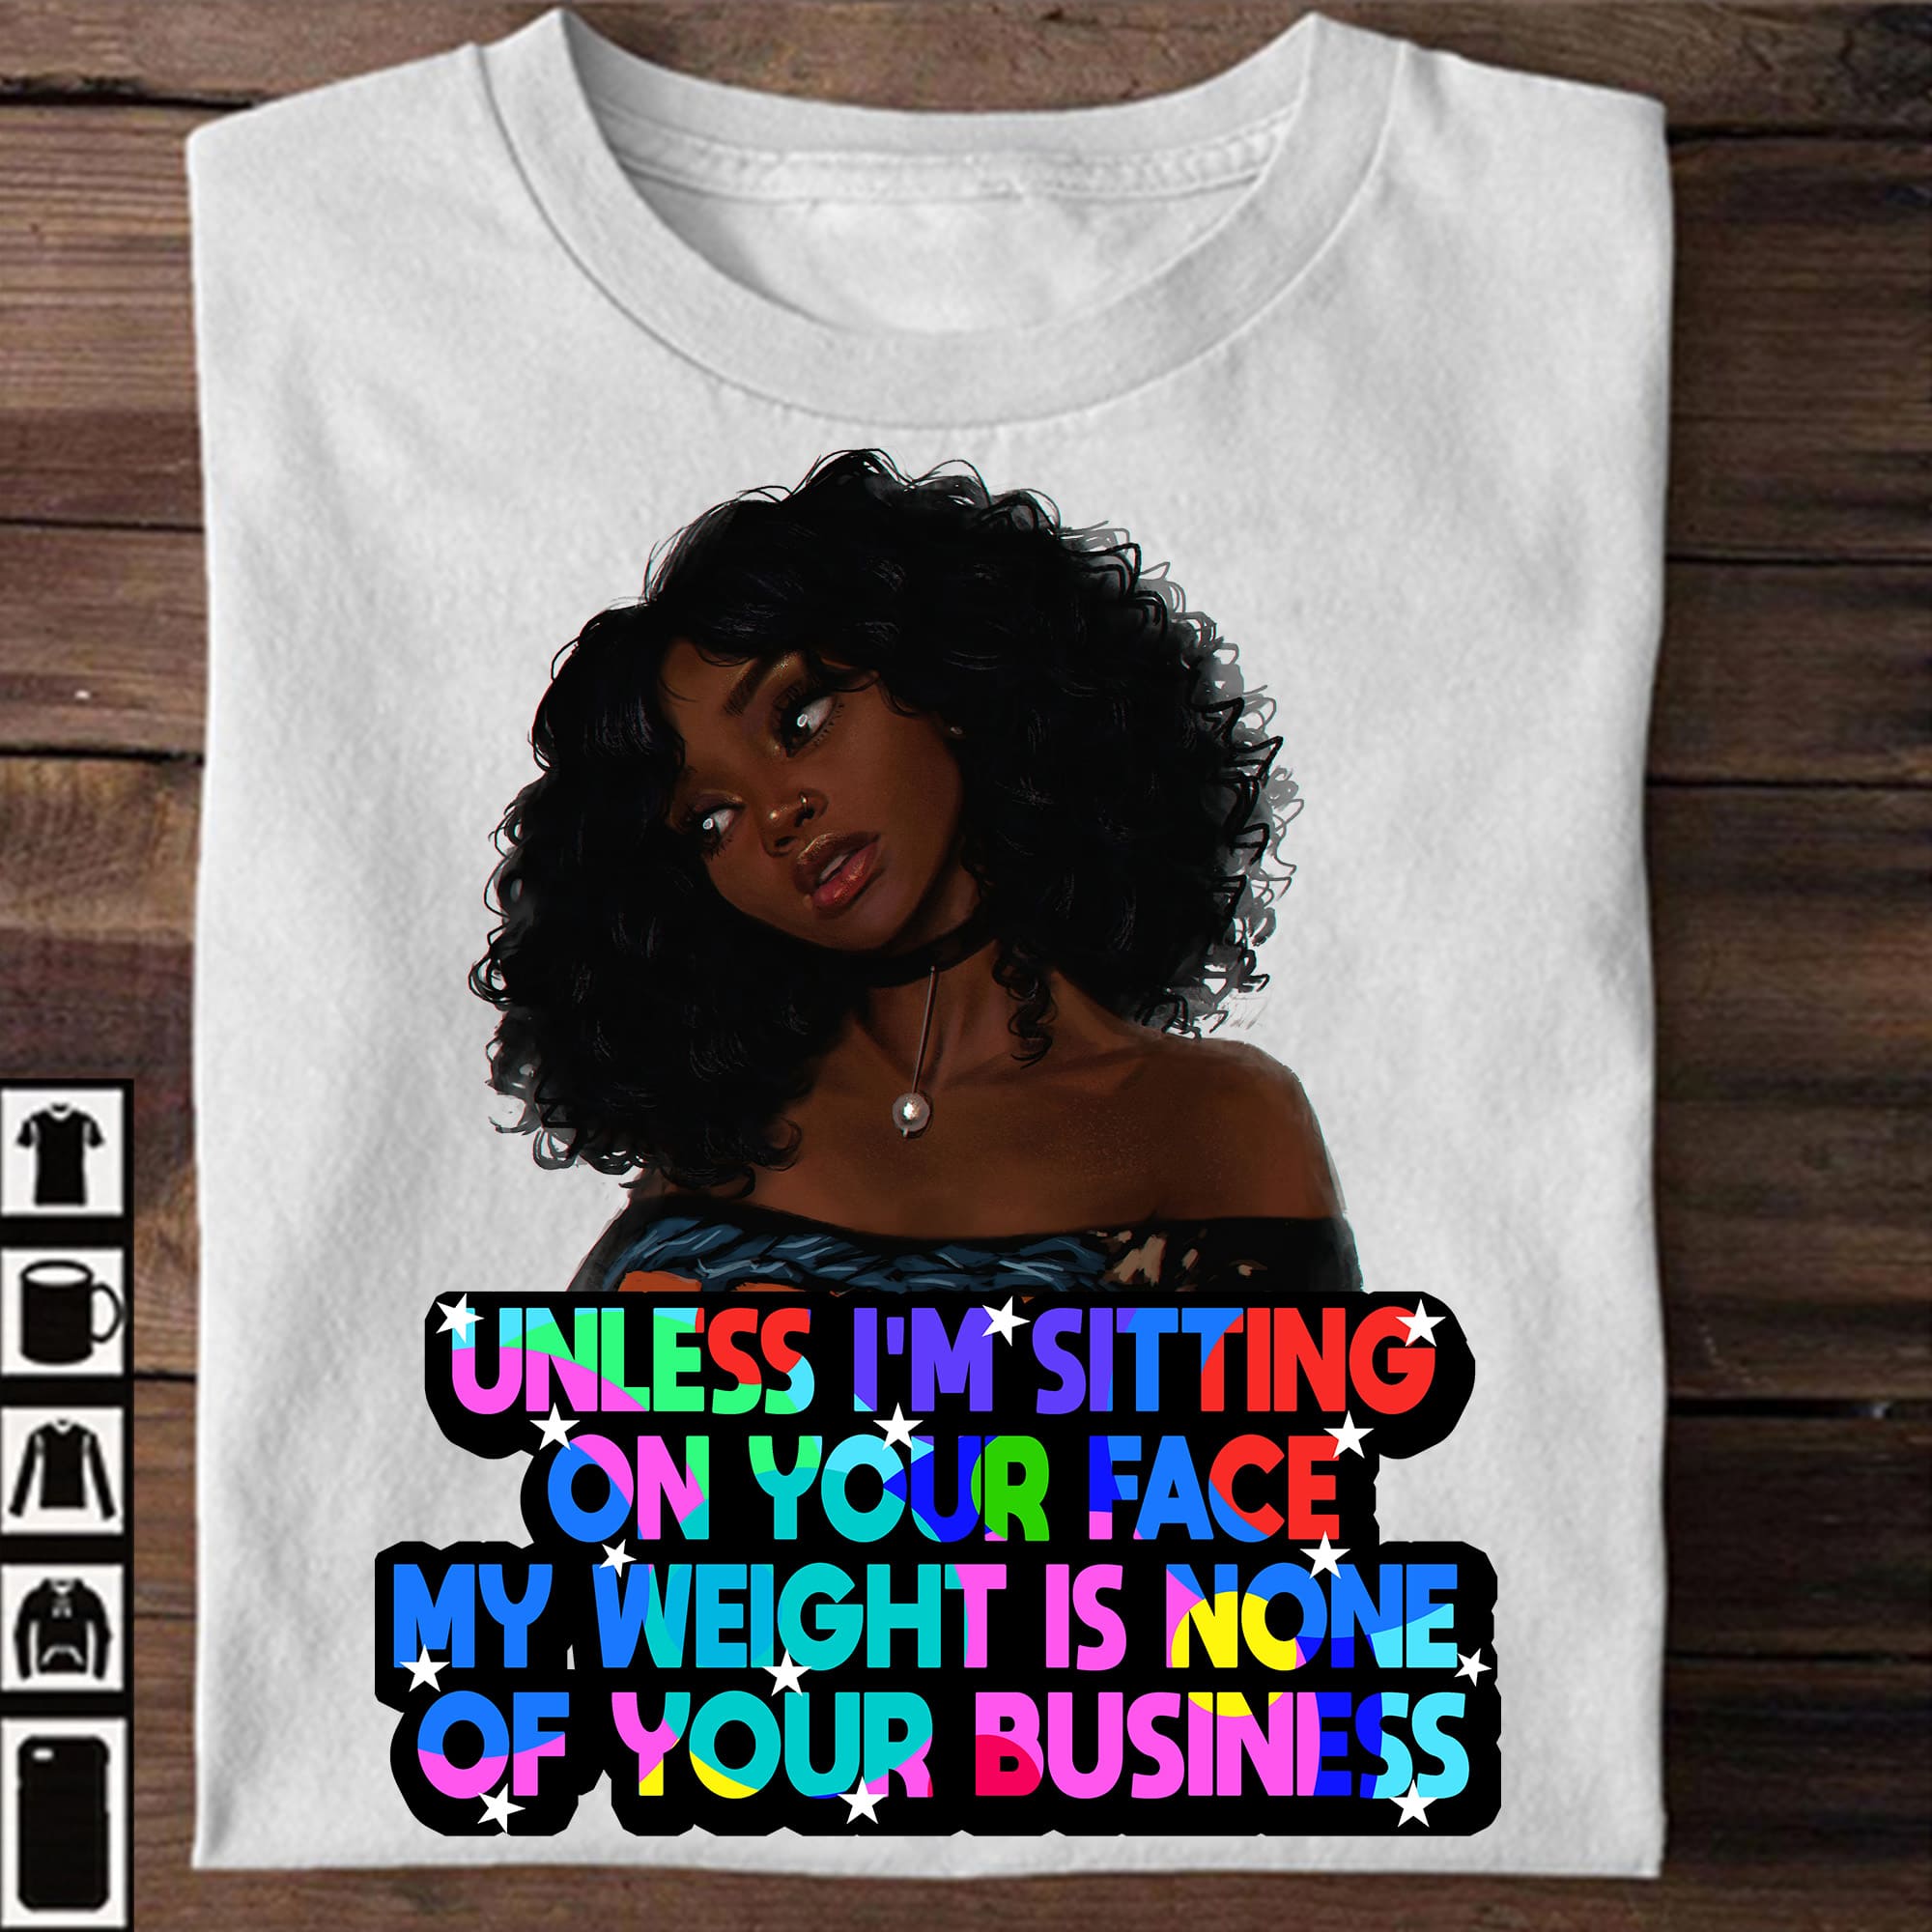 Unless I'm sitting on your face, my weight is none of your business - Black woman, gift for black girl